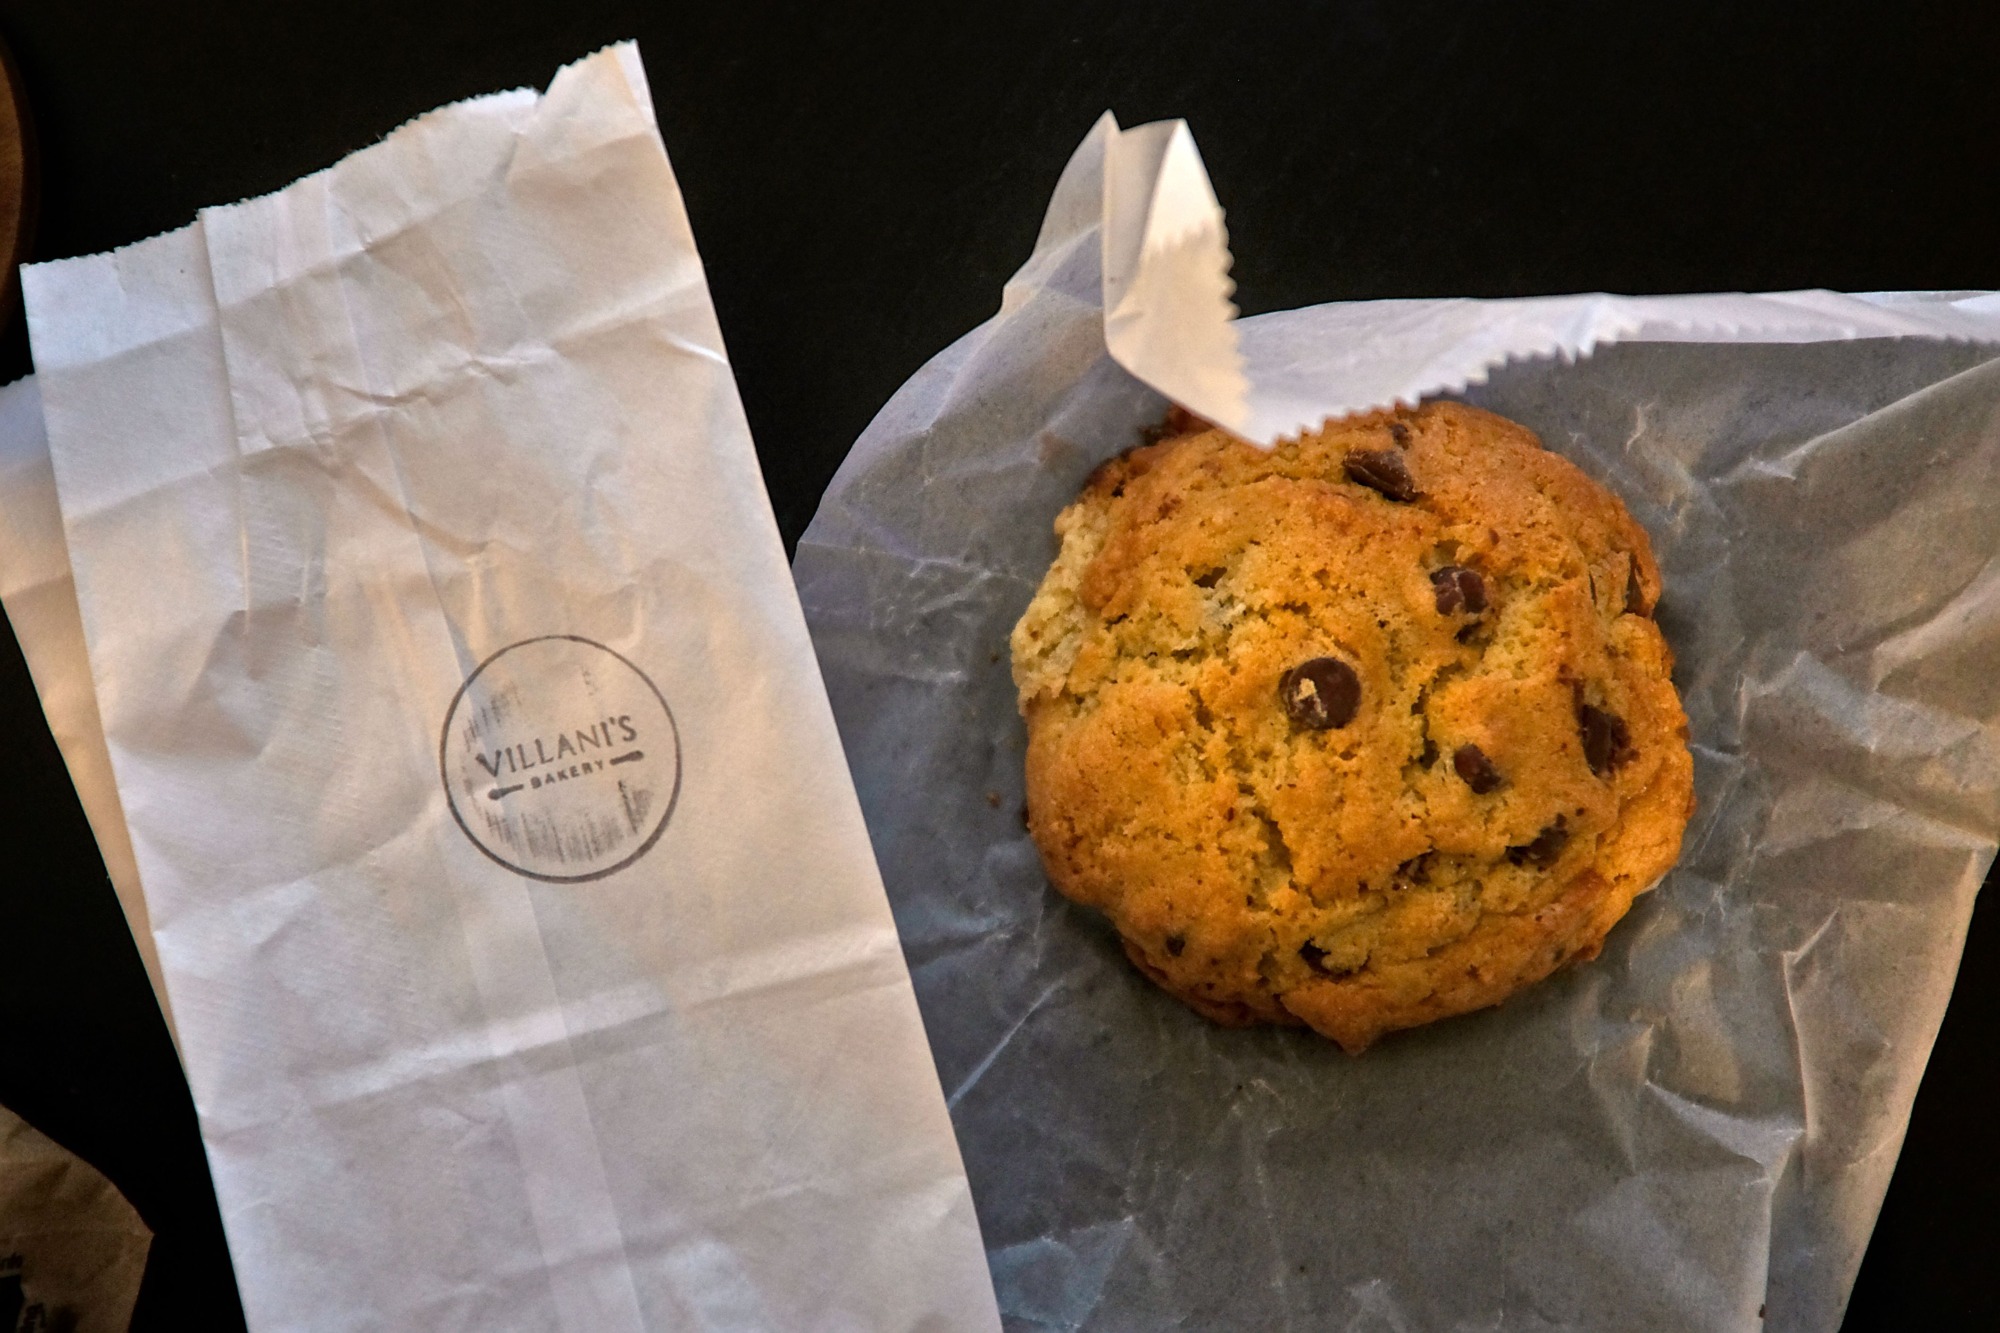 A chocolate chip cookie and a bag emblazoned with the Villani's Bakery logo